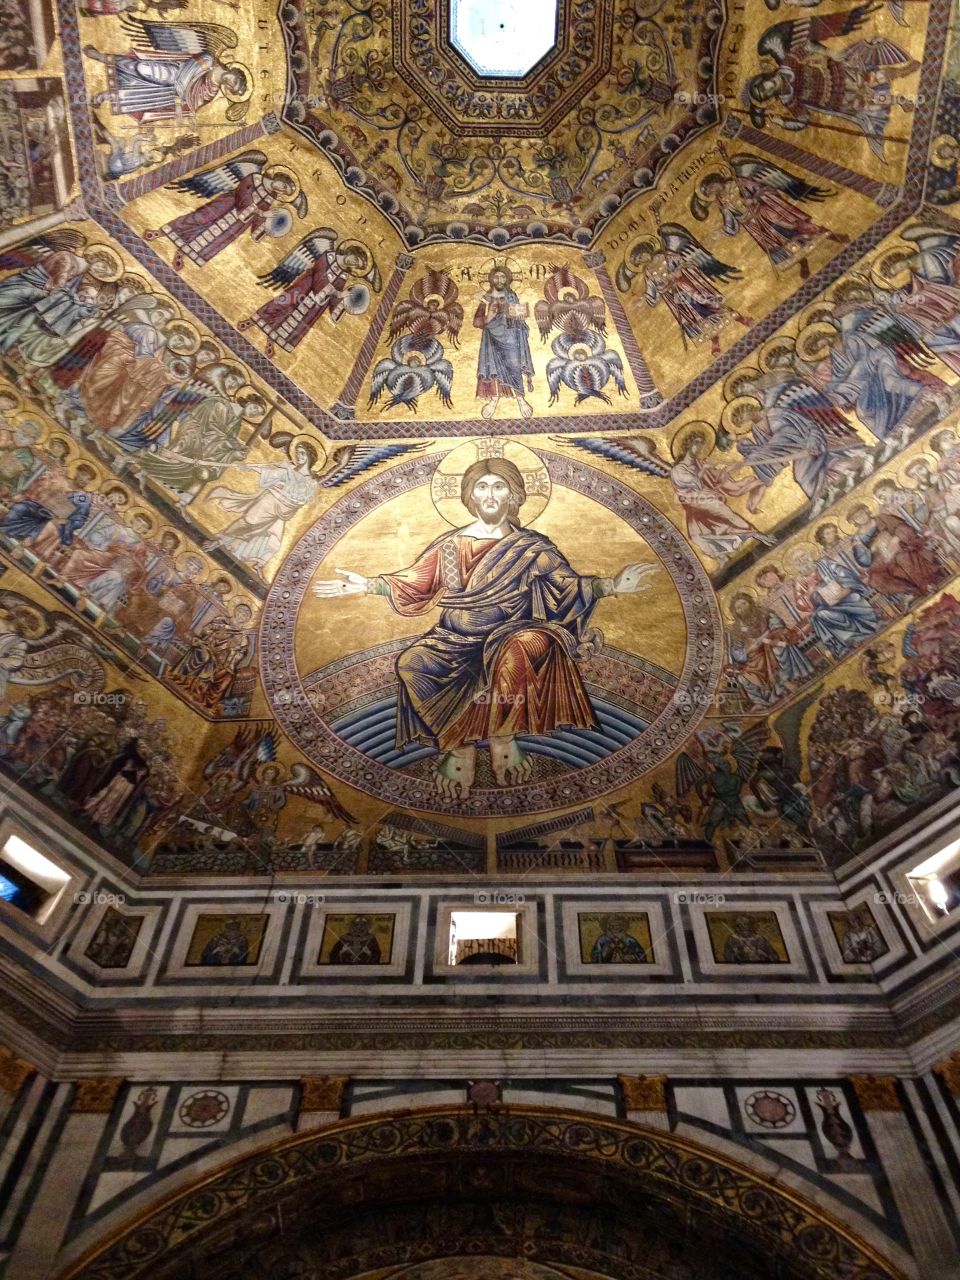 Mosaics in the baptistery of Florence showing scenes from the Old and New Testament and the Last Judgment